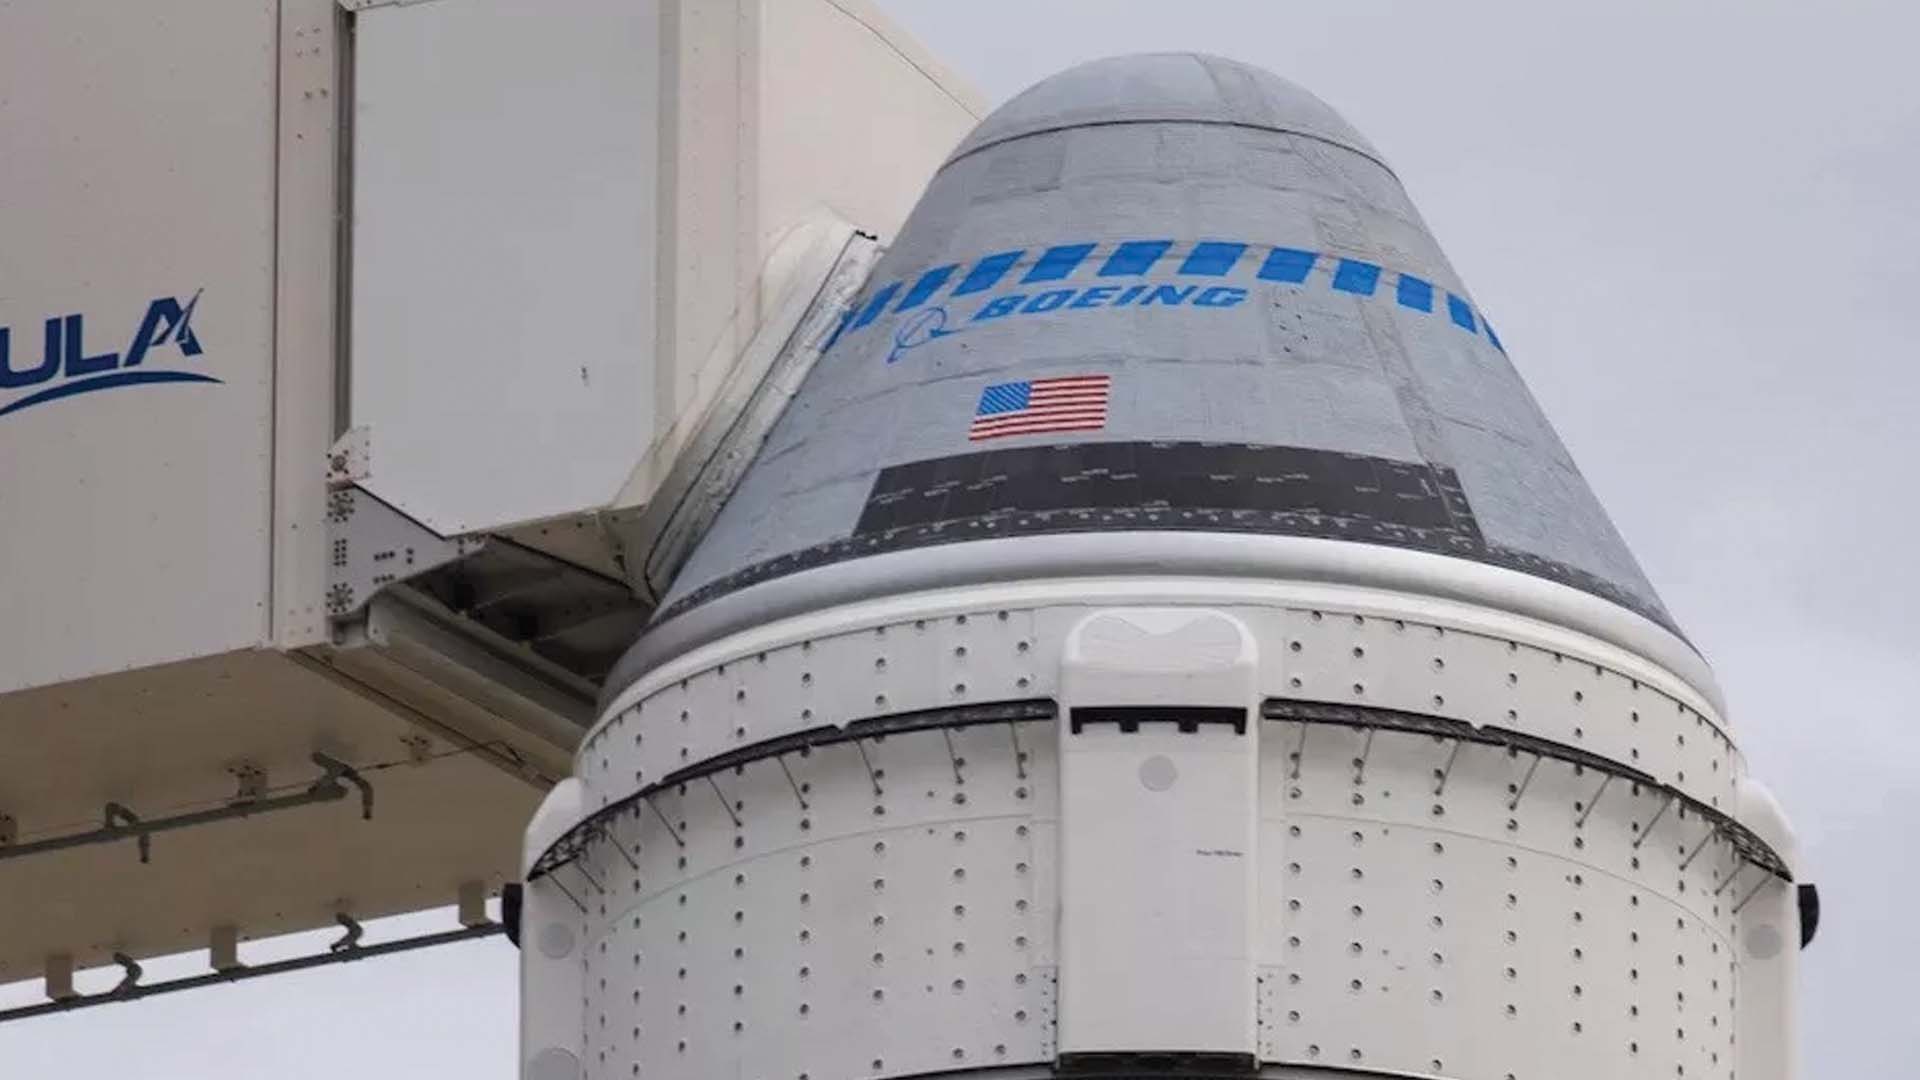 Boeing’s CST-100 Starliner spacecraft sits atop a United Launch Alliance Atlas V rocket